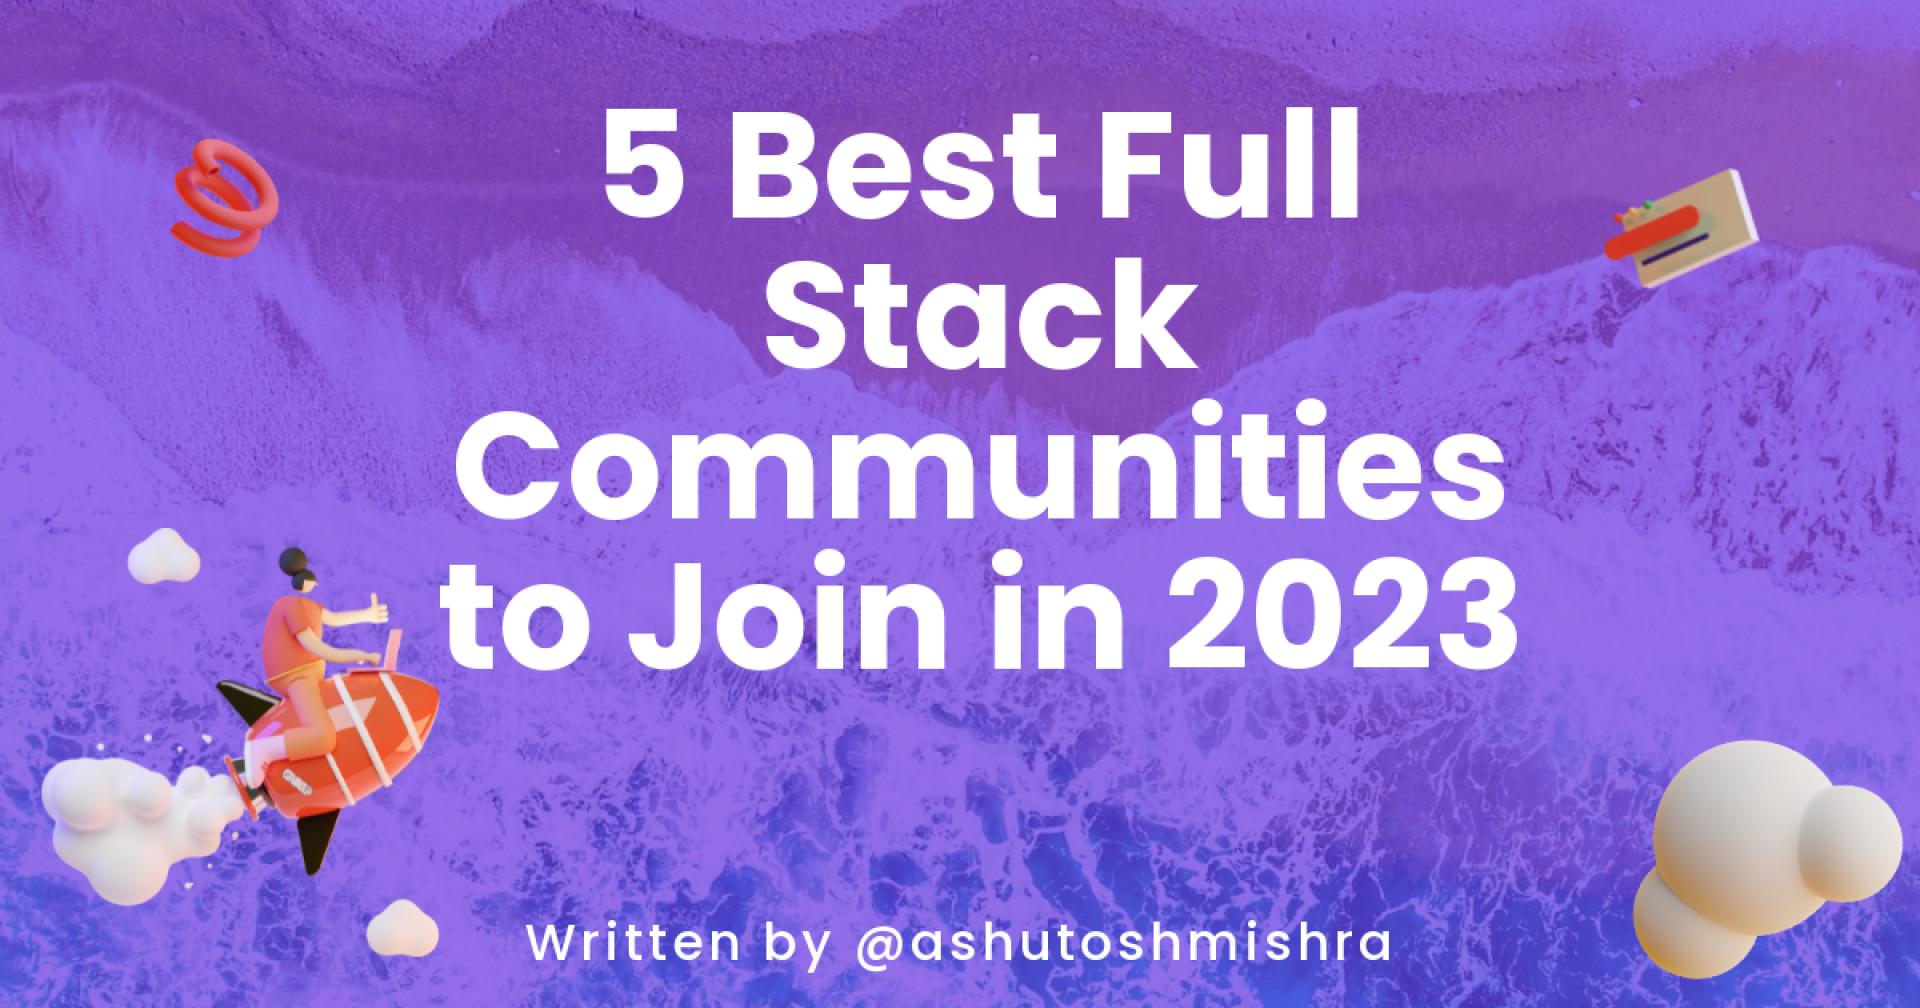 5 Best Full Stack Communities to Join in 2023